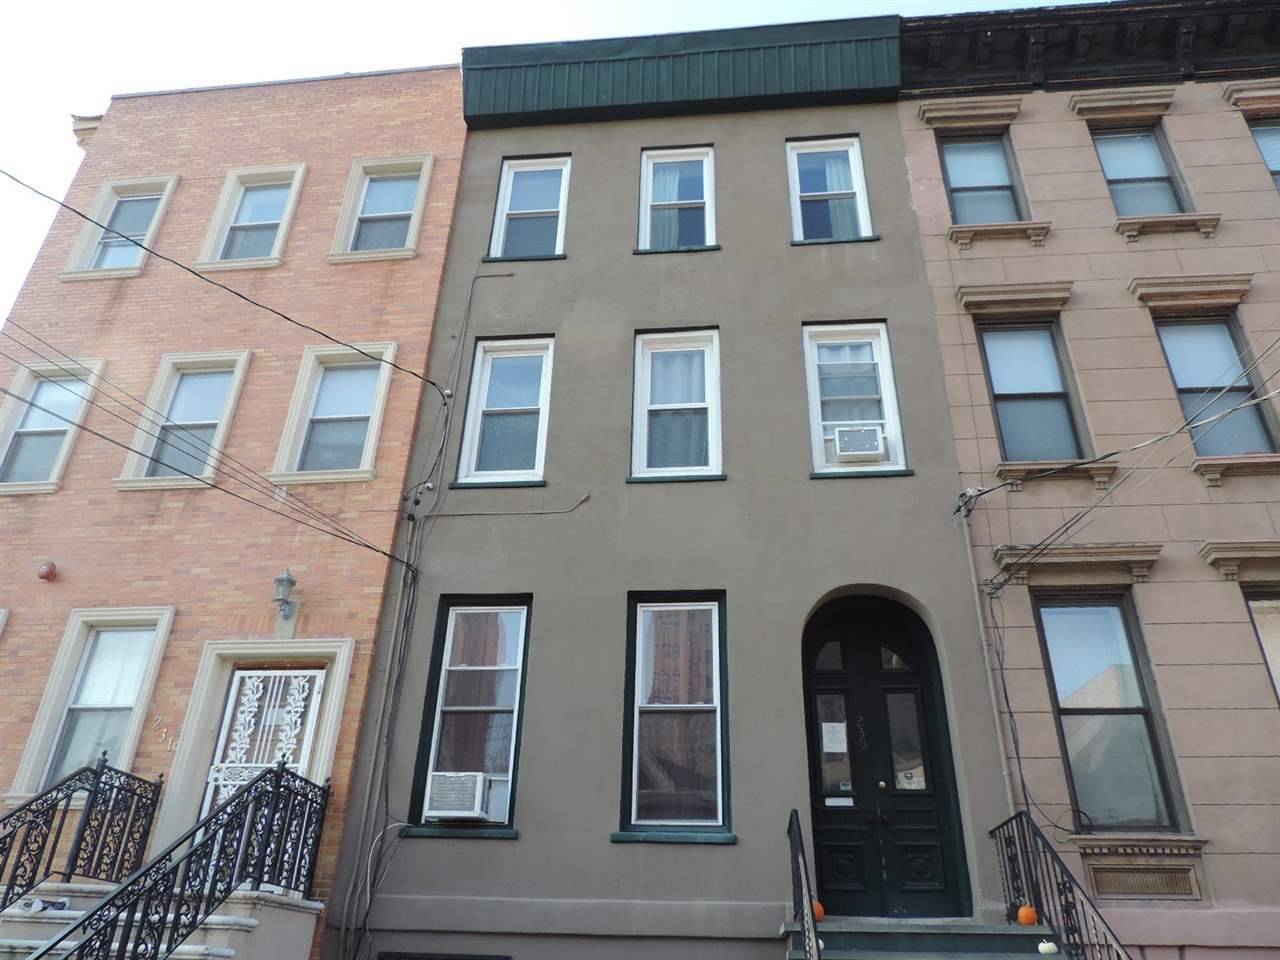 Wonderful brownstone in McGinley Square - 1 BR New Jersey